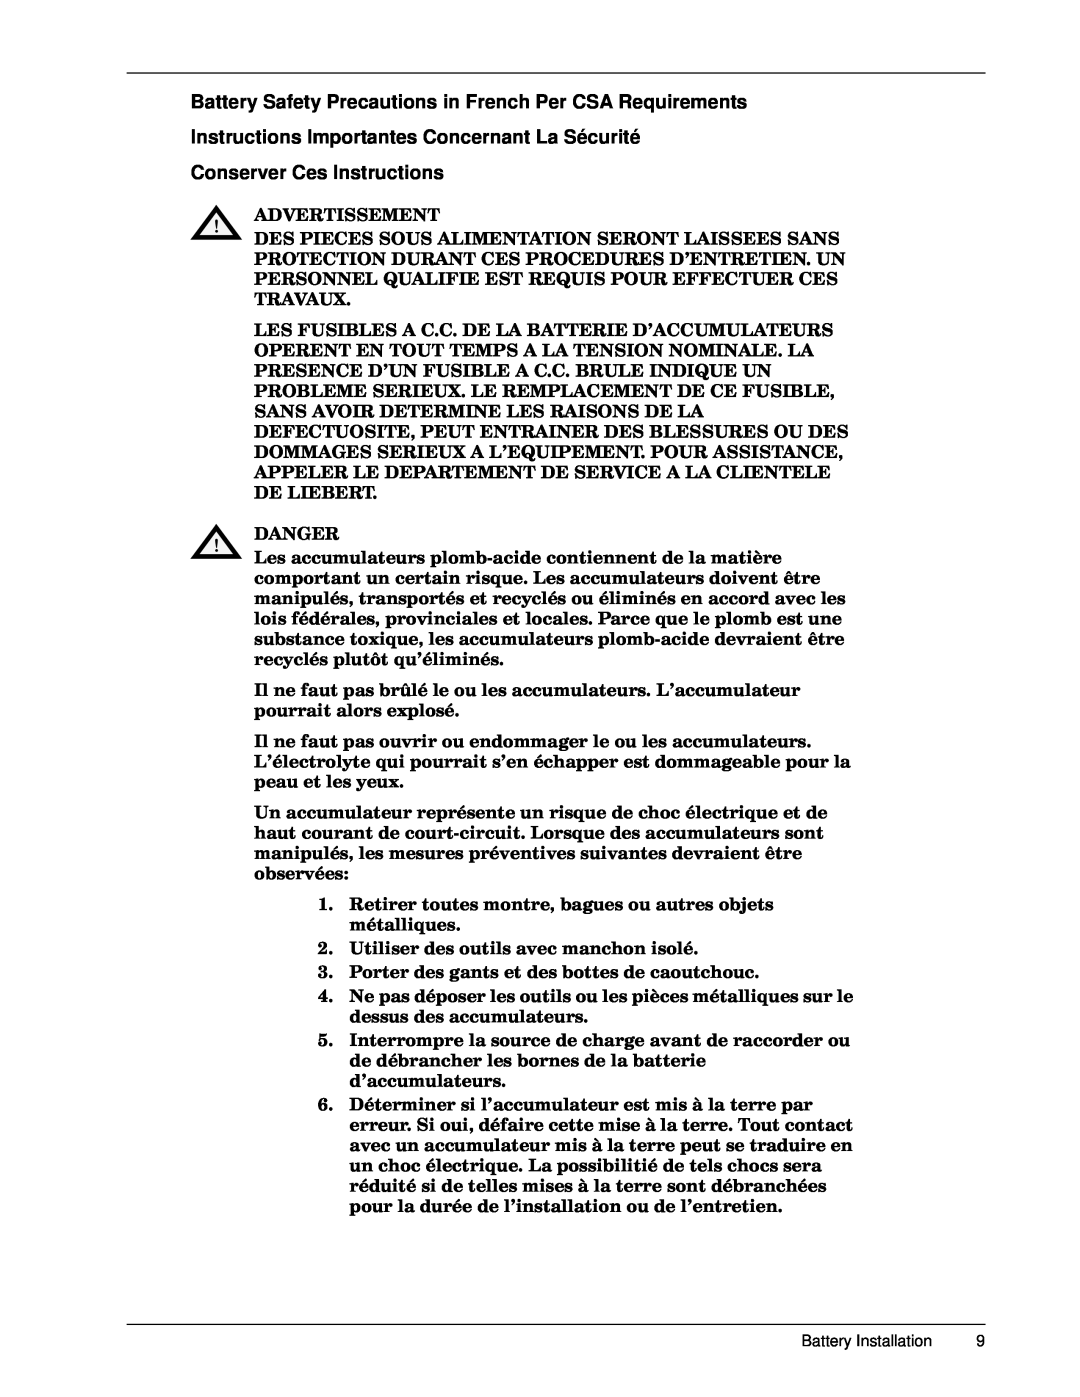 Emerson 30-130 kVA Battery Safety Precautions in French Per CSA Requirements, Conserver Ces Instructions, $957,66017, $1*5 